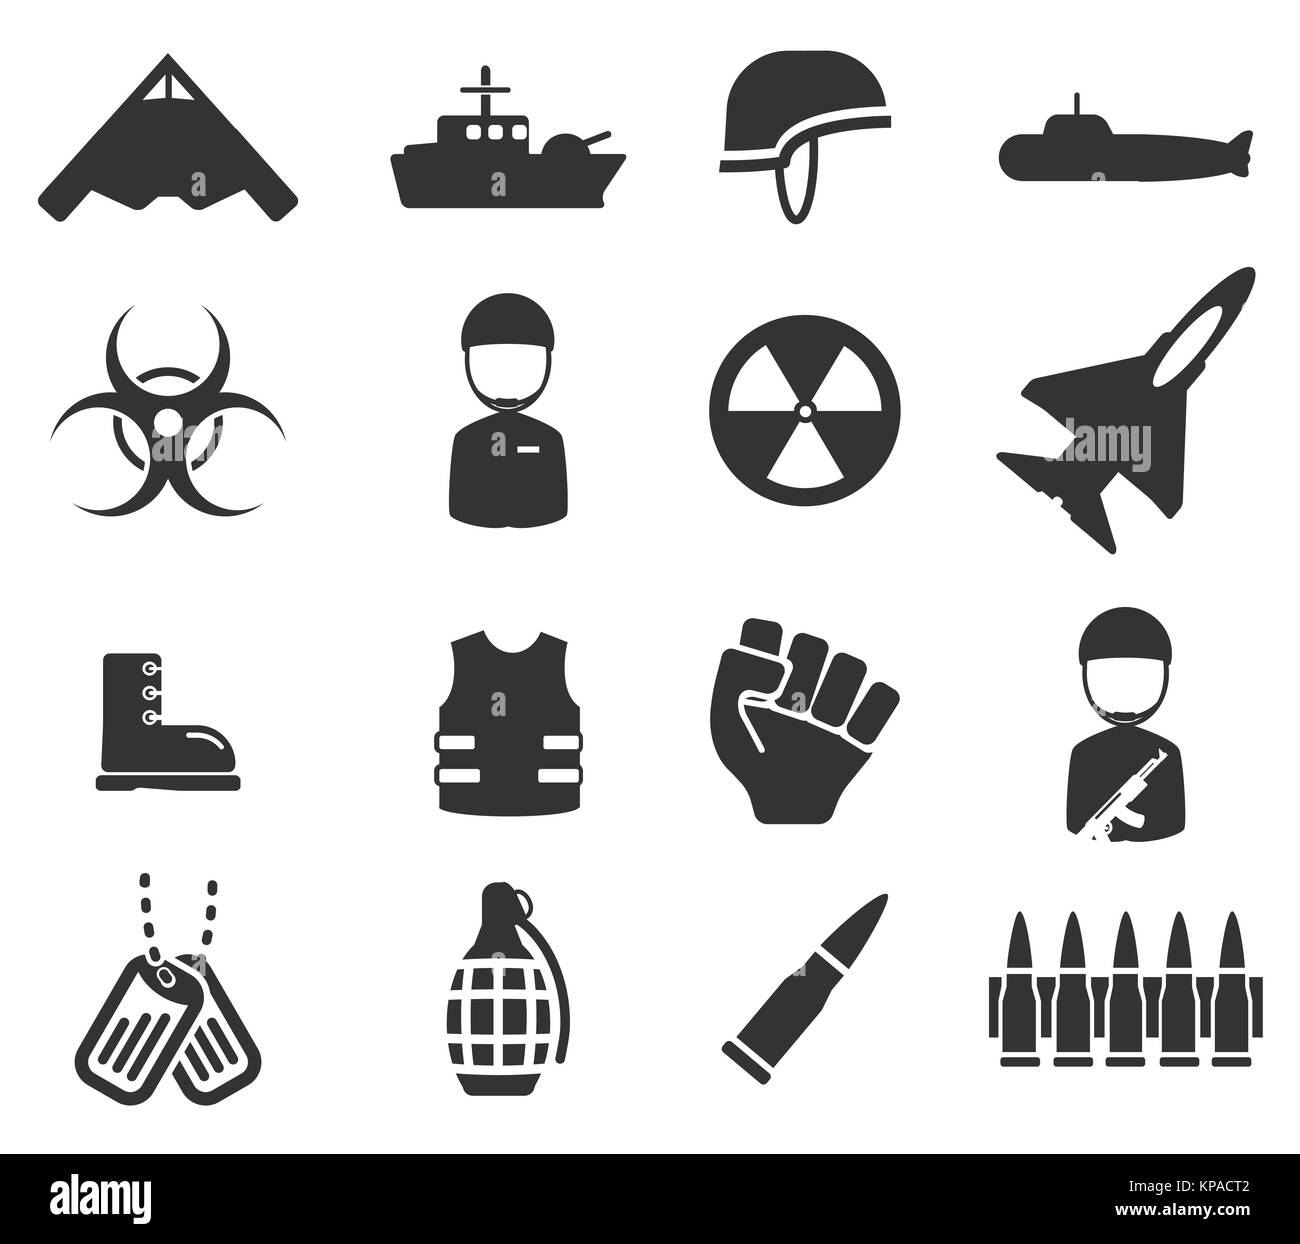 Military simply icons Stock Photo